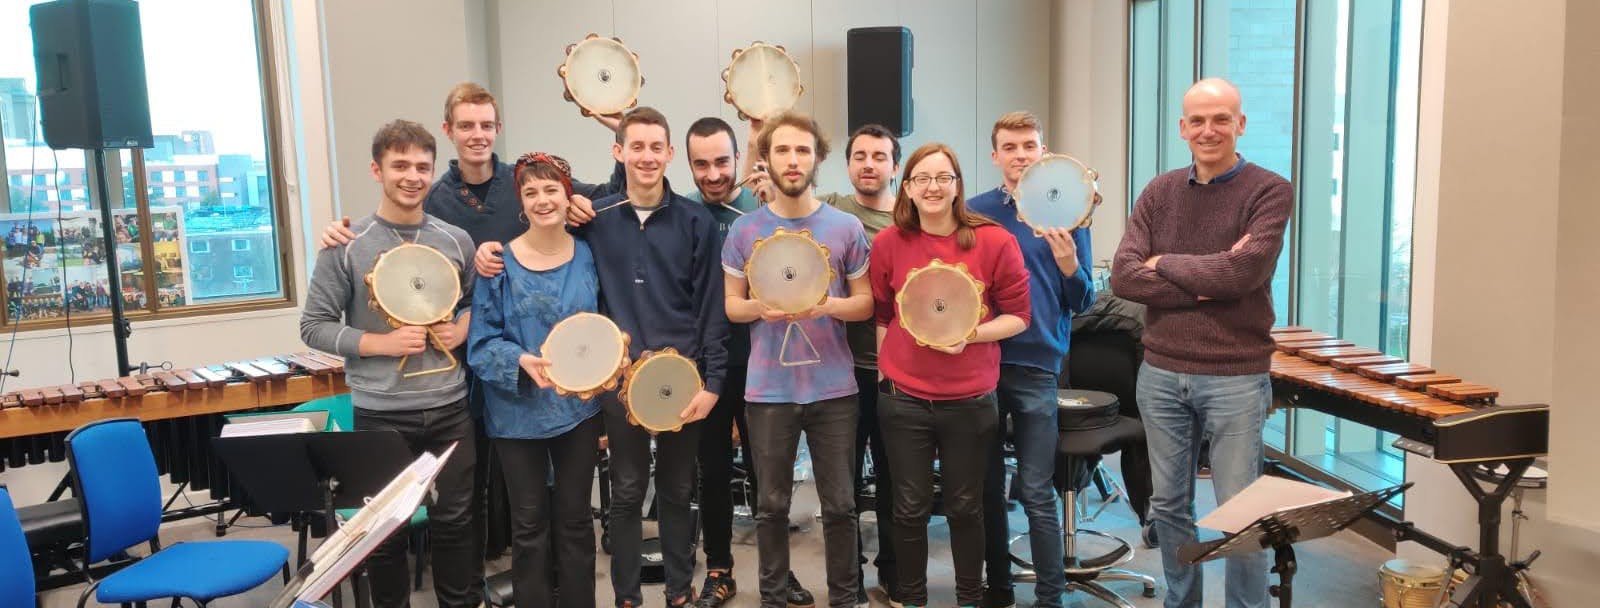 Tambourine masterclass with Jon Herbert . Group holding tambourines looking into camera and smiling